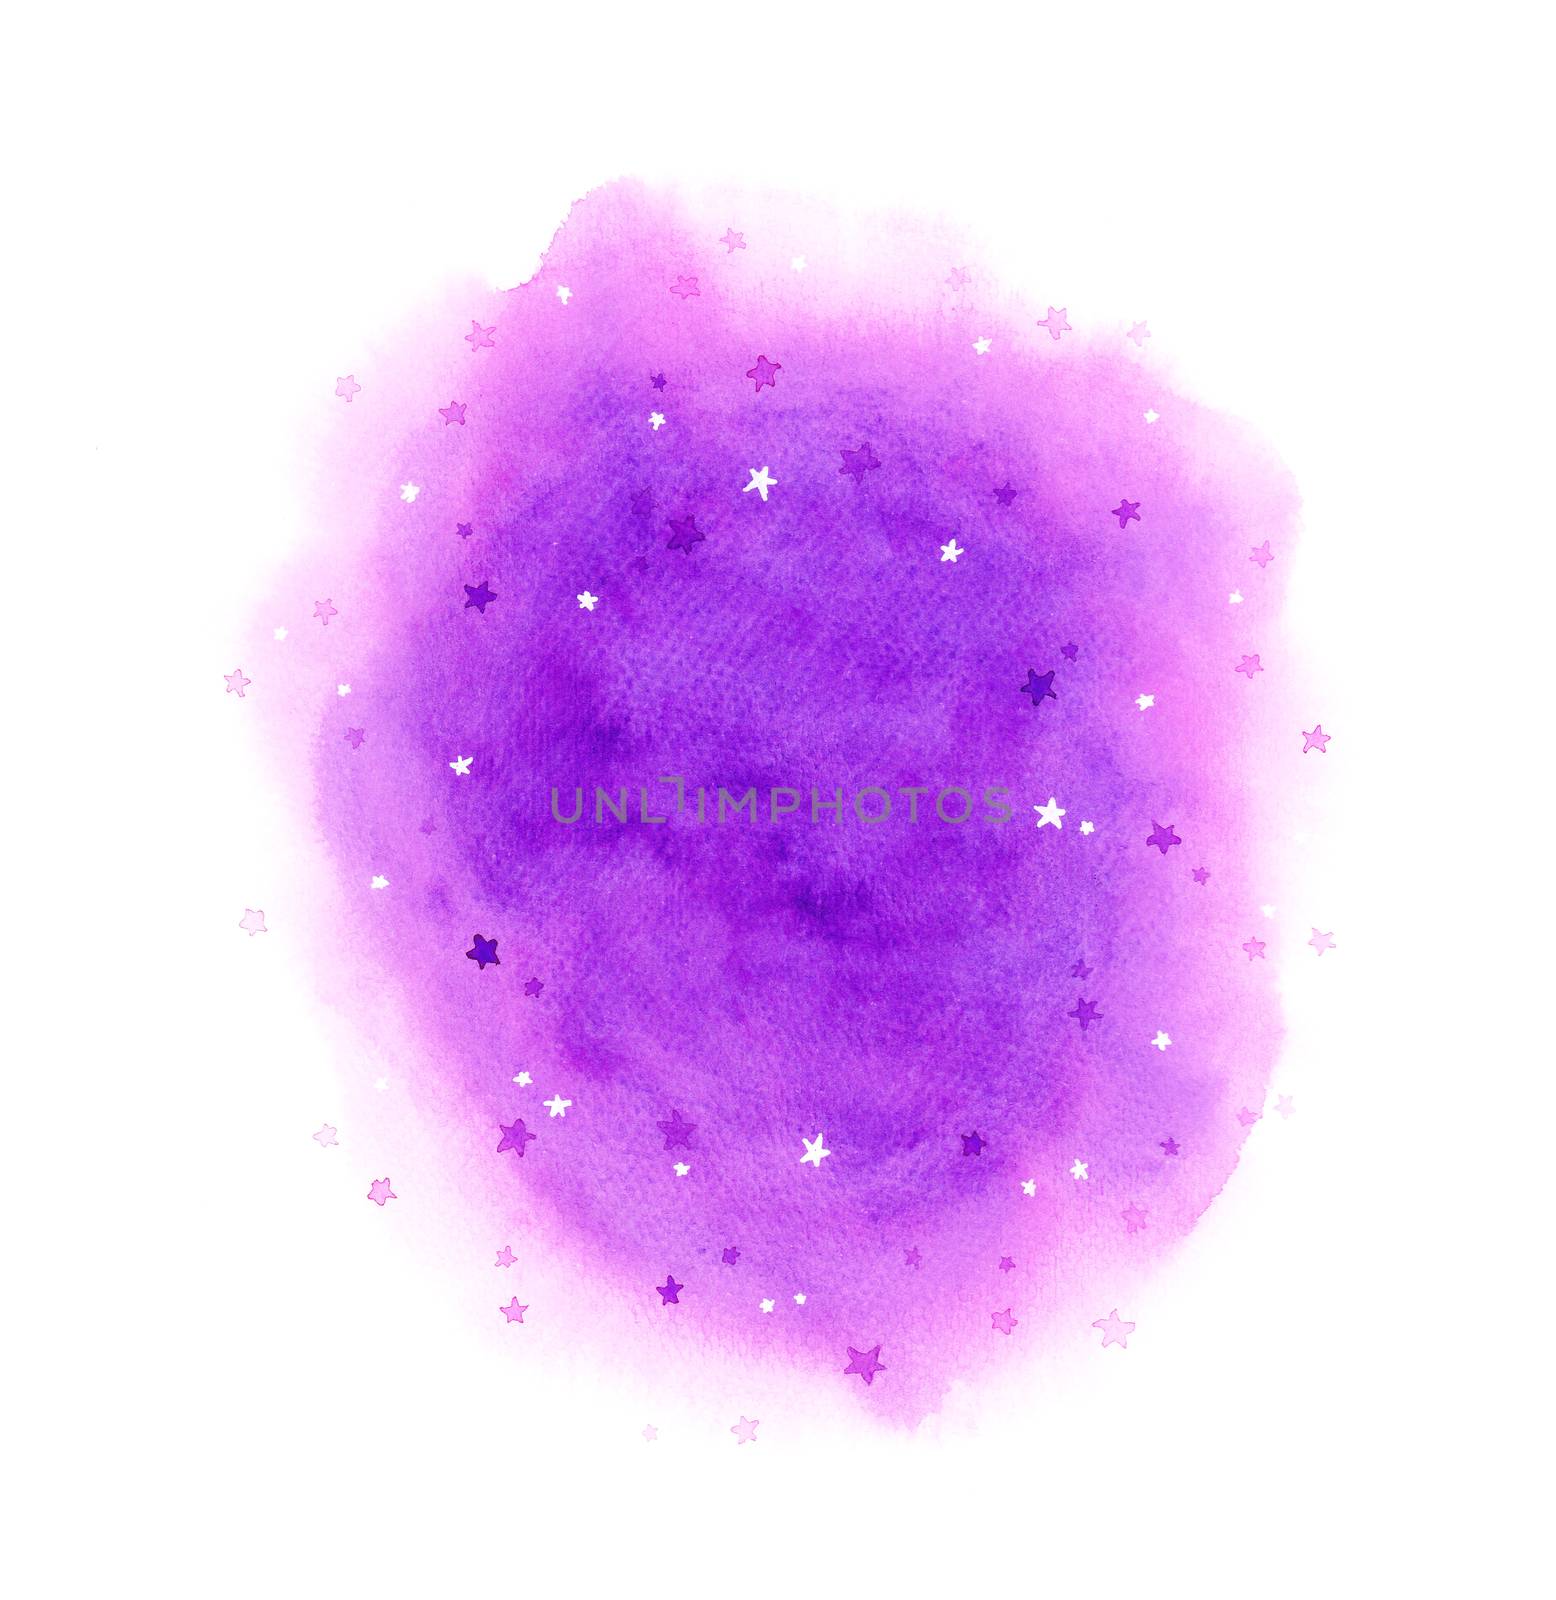 abstract purple background in galaxy concept. watercolor hand painting illustration.  Design element for wallpaper, packaging, banner, poster, flyer. by Ungamrung